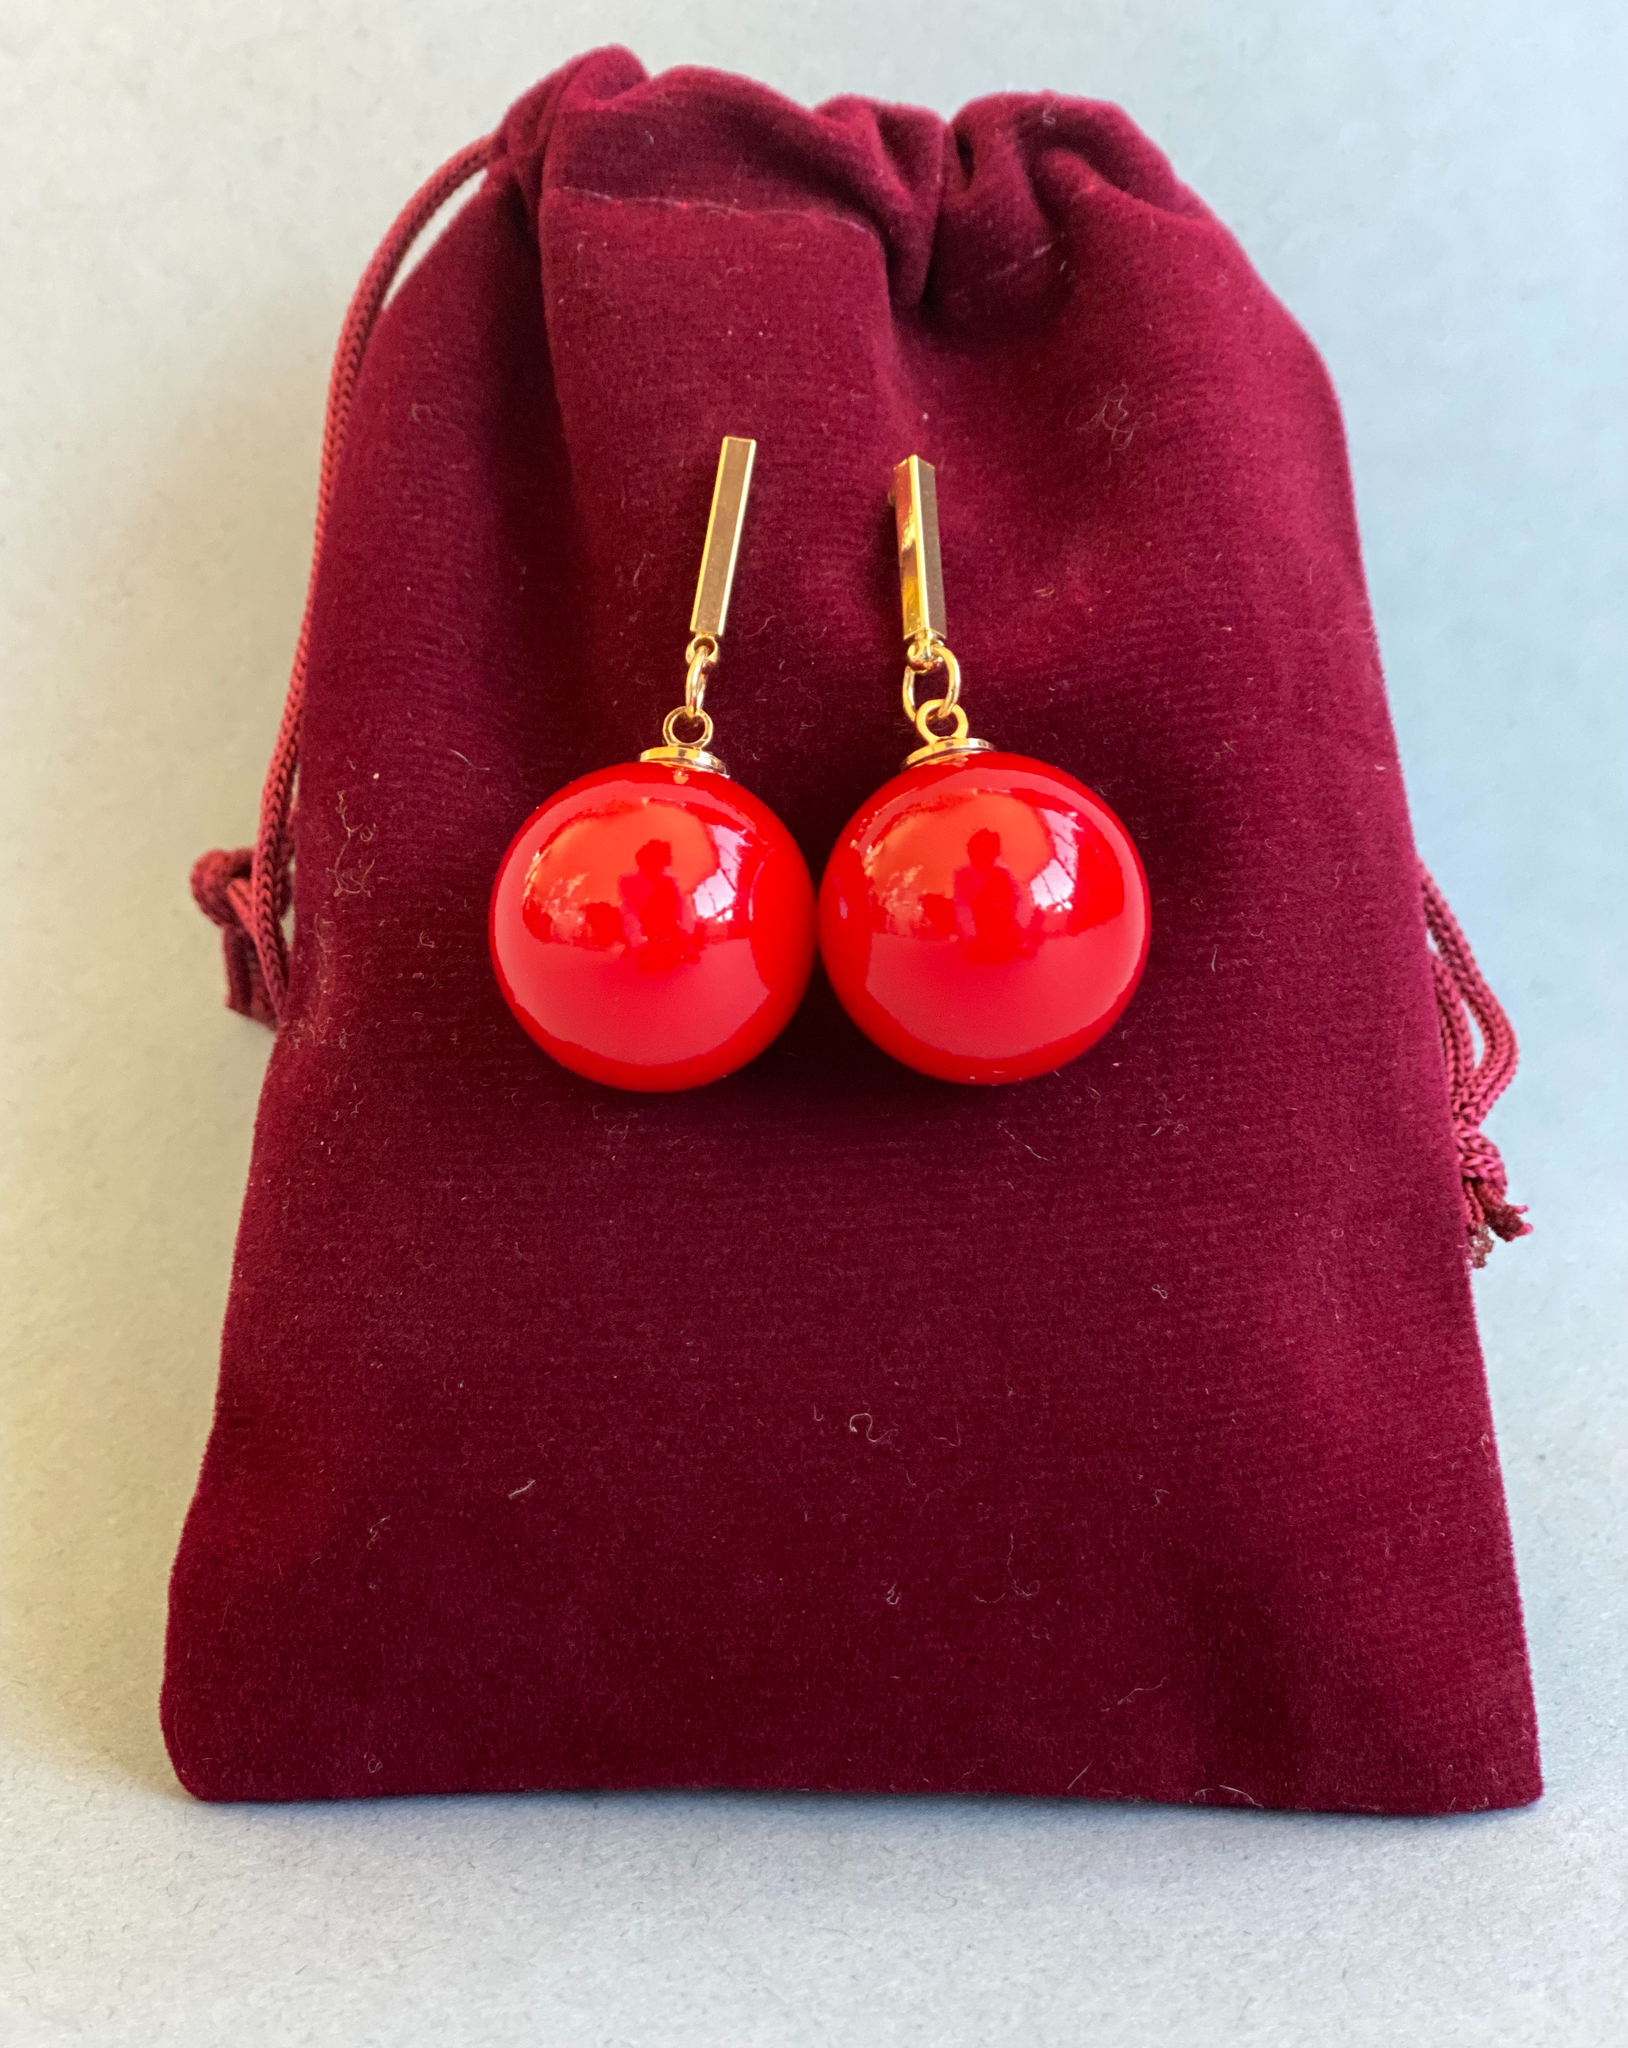 Red and Round Earrings